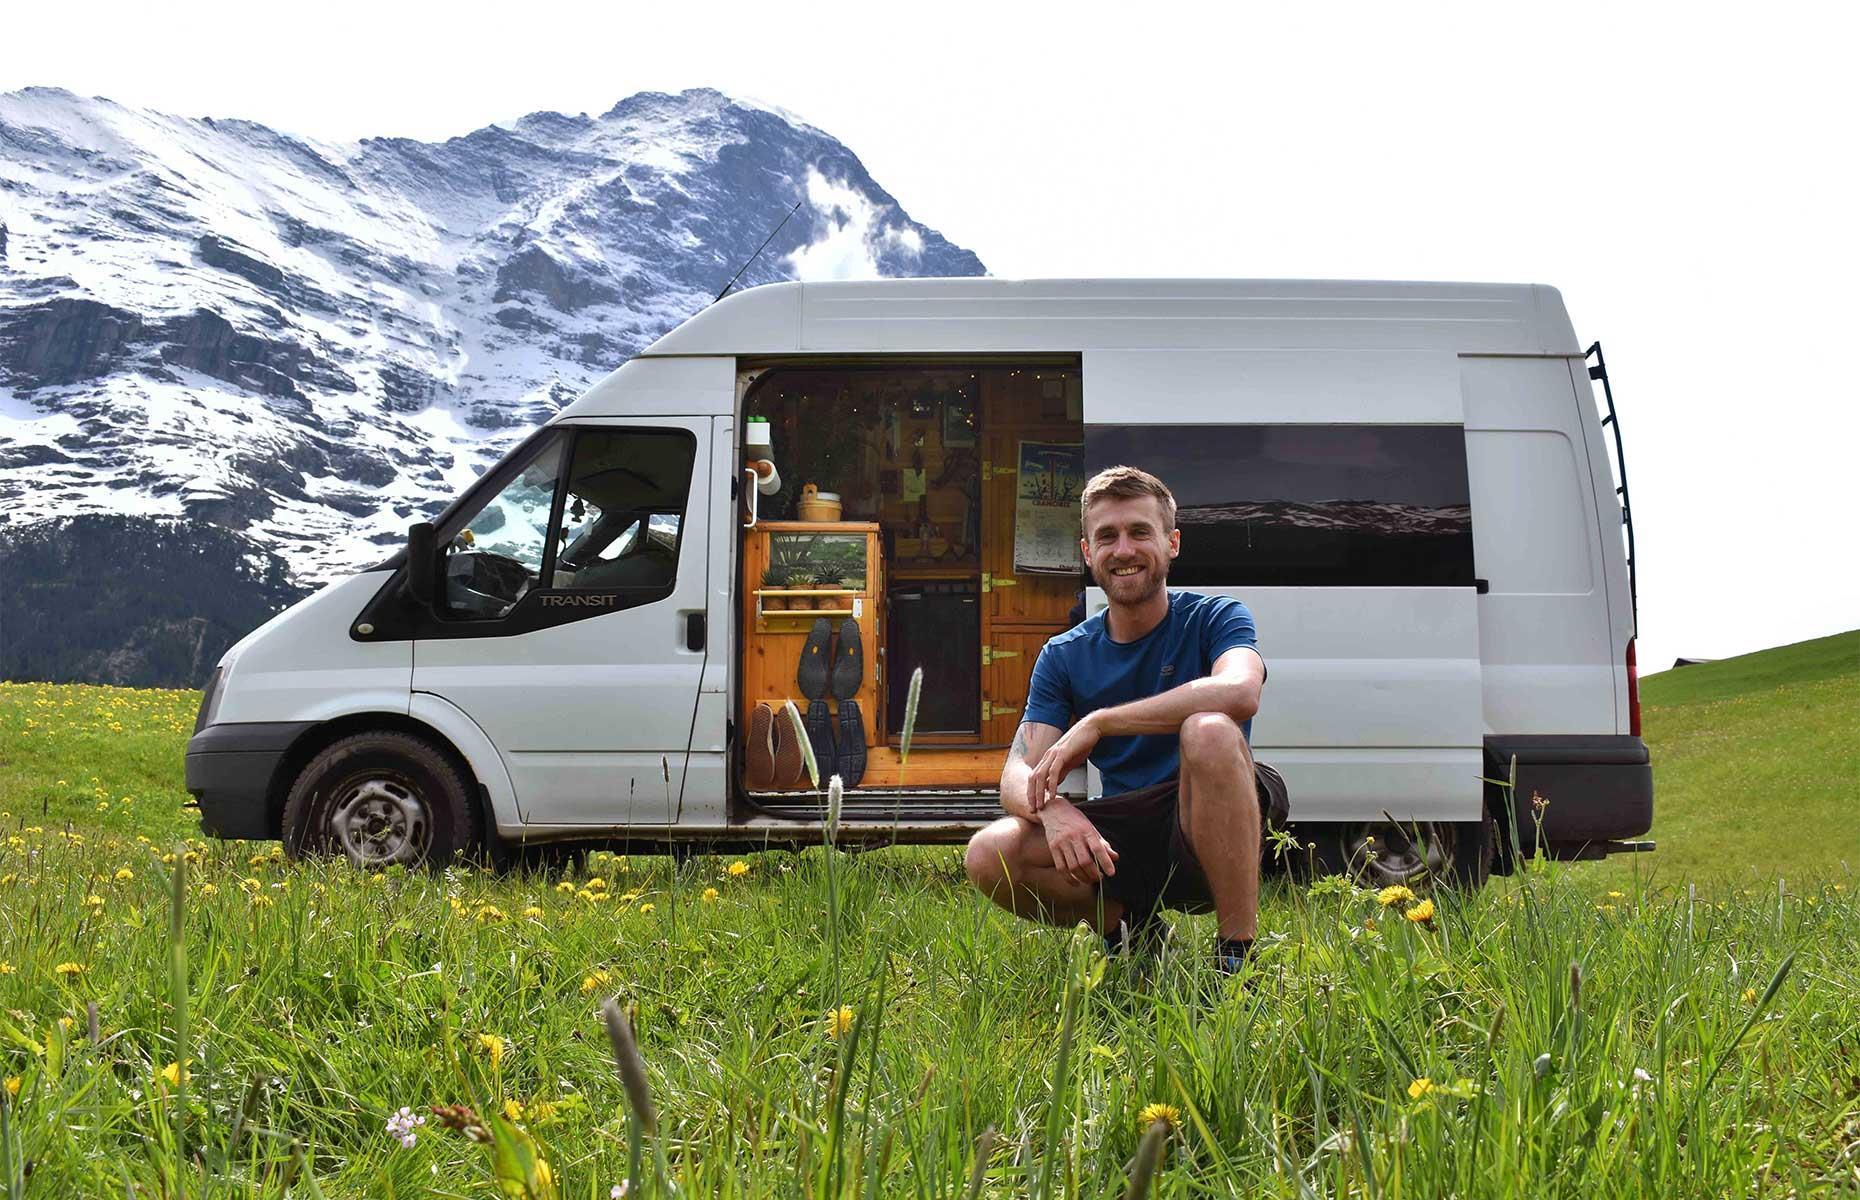 <p>Irish-born Shane Monks O'Byrne lives in a converted 2012 Ford Transit. The digital nomad bought the van for £5,900 ($7.6k) or €7,000 in the local currency and taught himself how to complete a full conversion, which cost about the same amount. He enjoyed the project so much that he now runs a tutorial website, <a href="https://www.thevanconversion.com/">The Van Conversion</a>, teaching others how to do the same. </p>